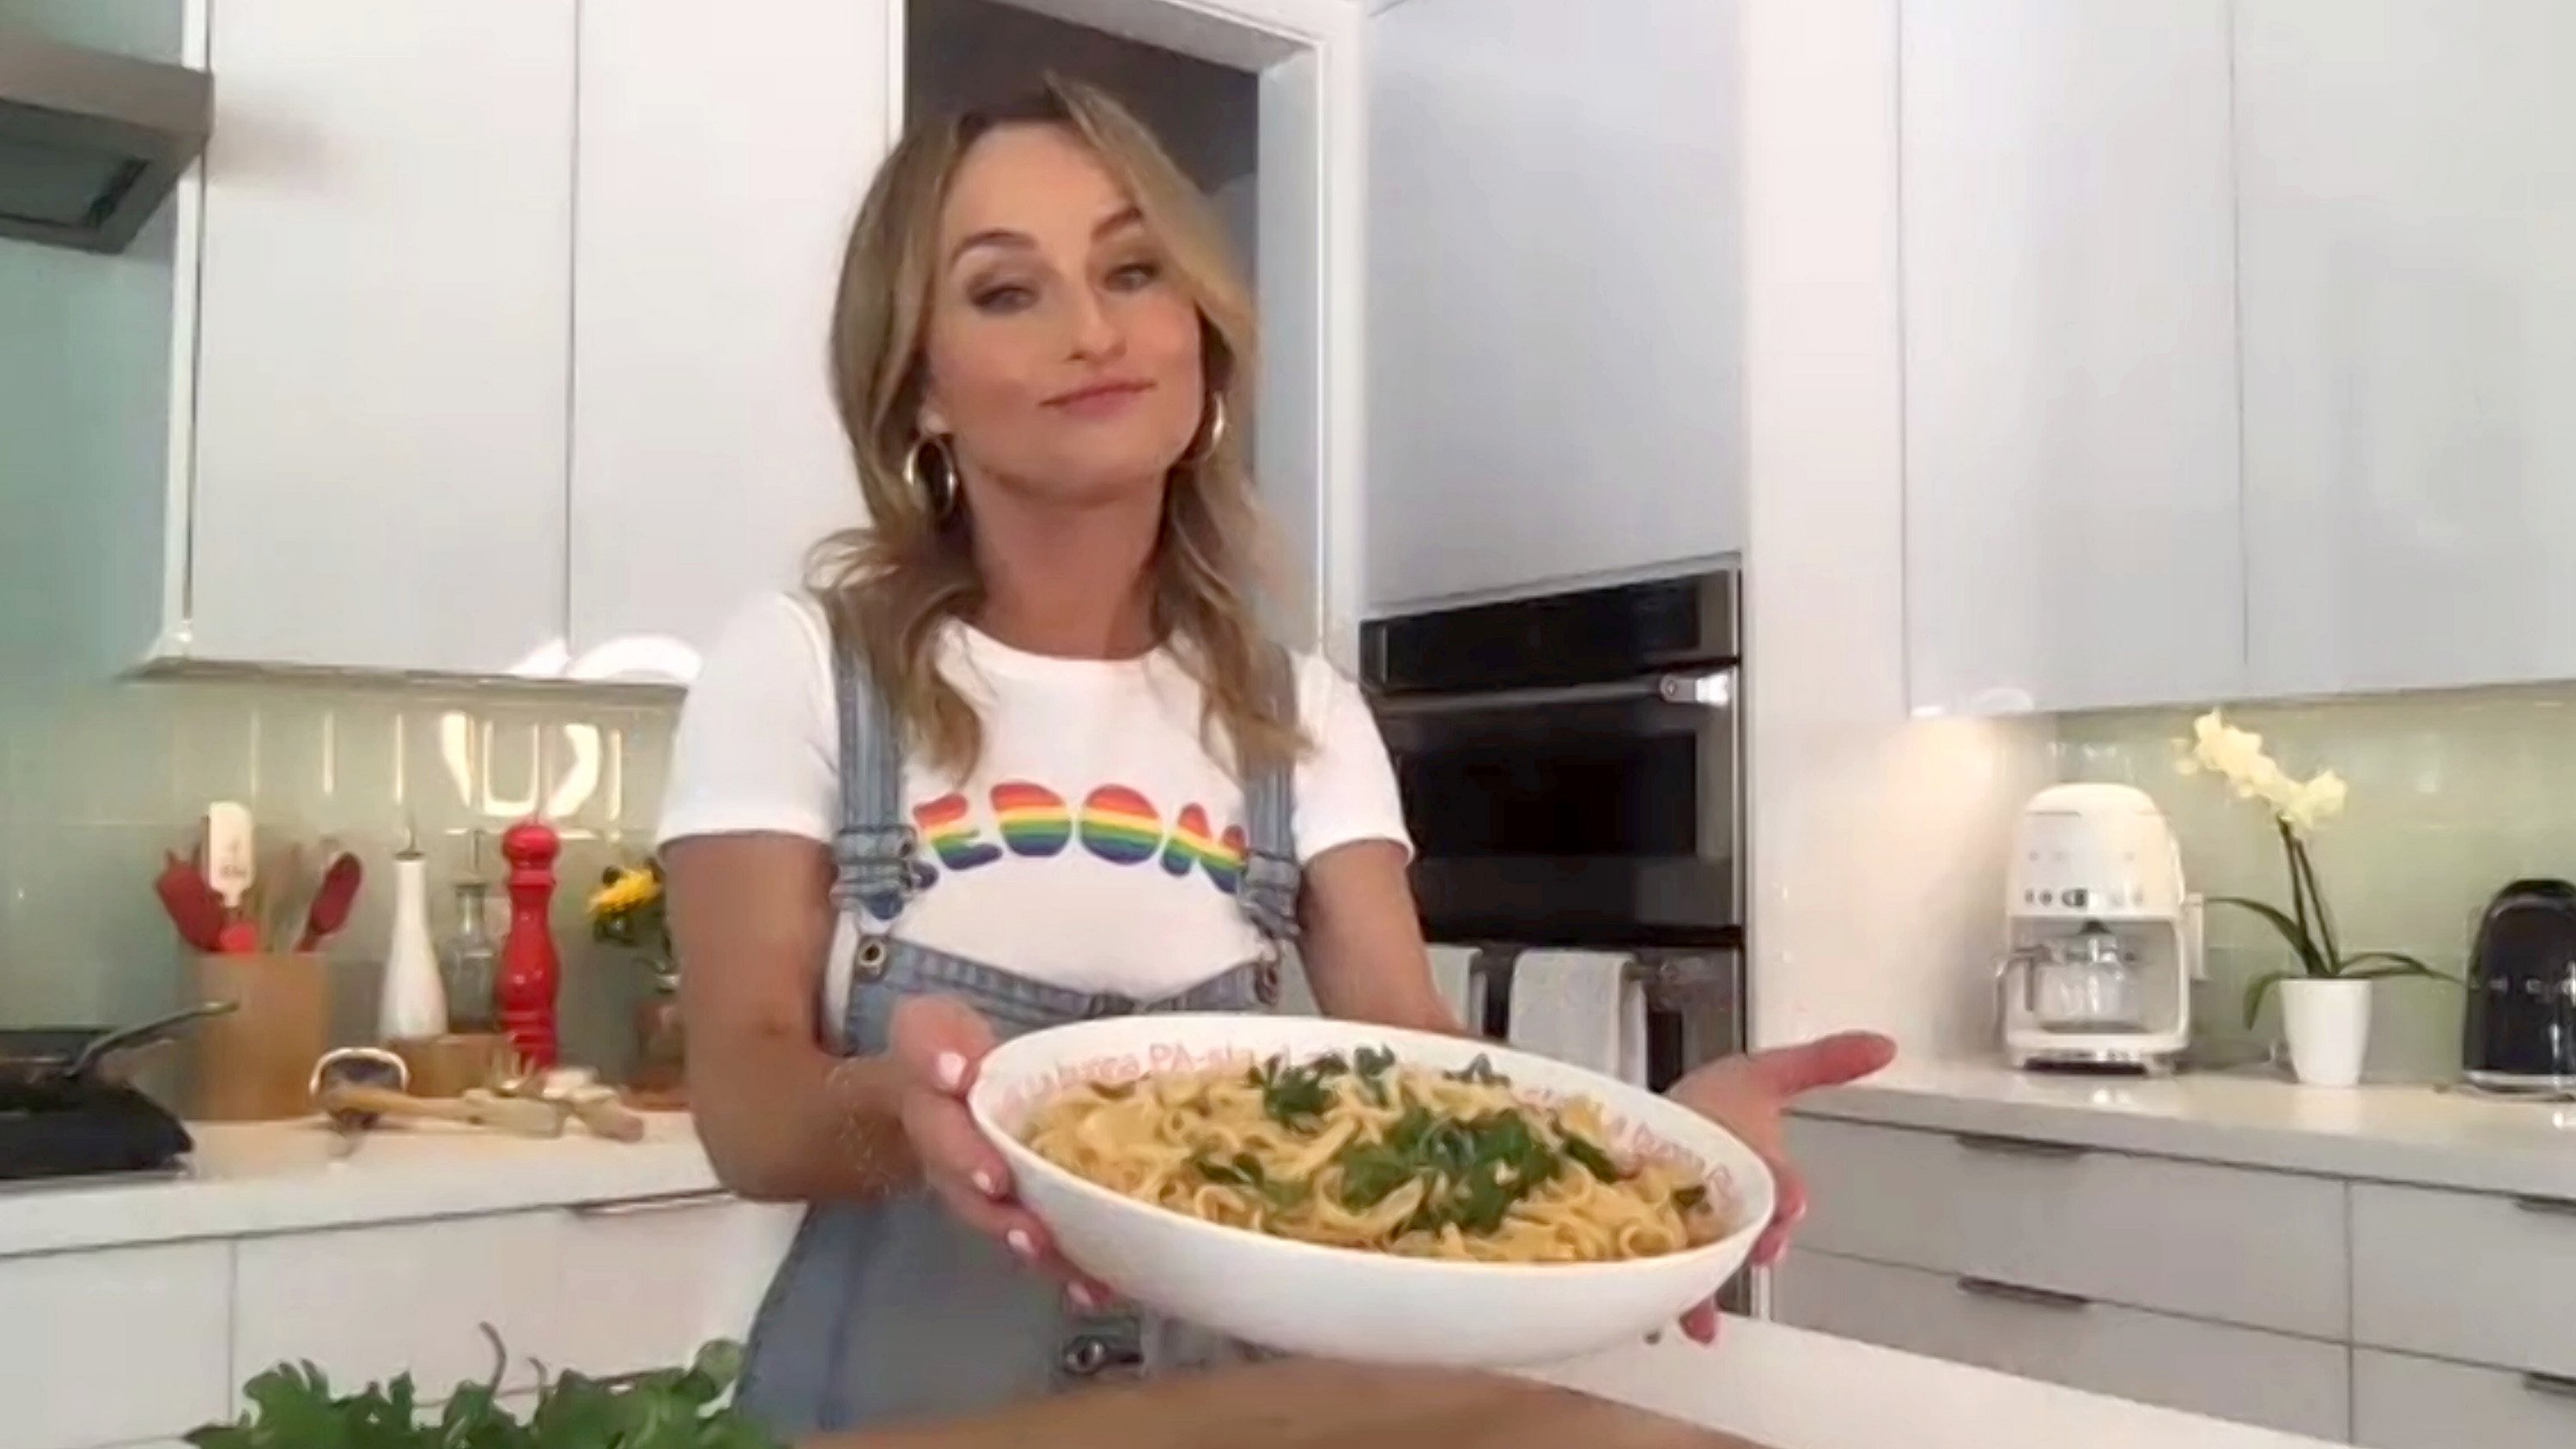 Celebrity chef Giada De Laurentiis stands in her kitchen wearing coveralls and holding a large bowl of pasta.